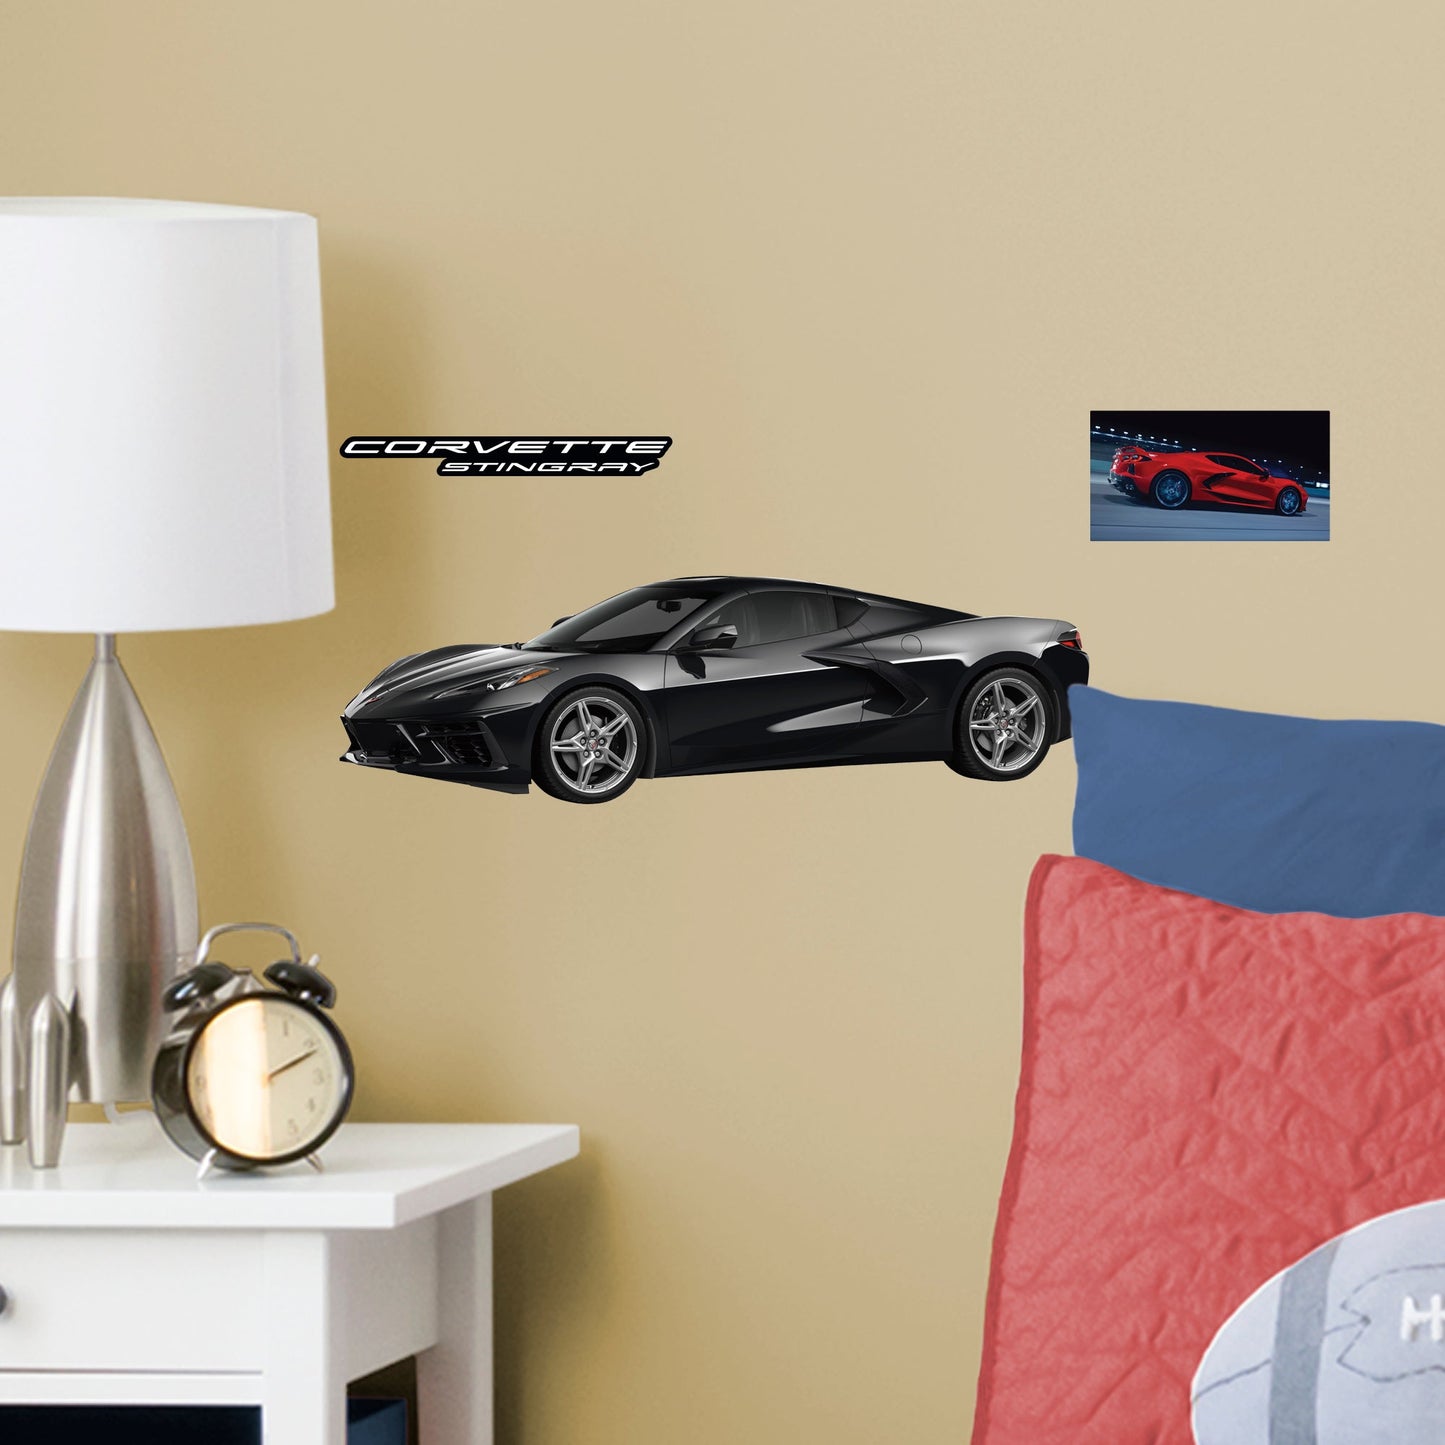 Chevrolet Corvette Black Stingray: Officially Licensed GM Removable Wall Decal